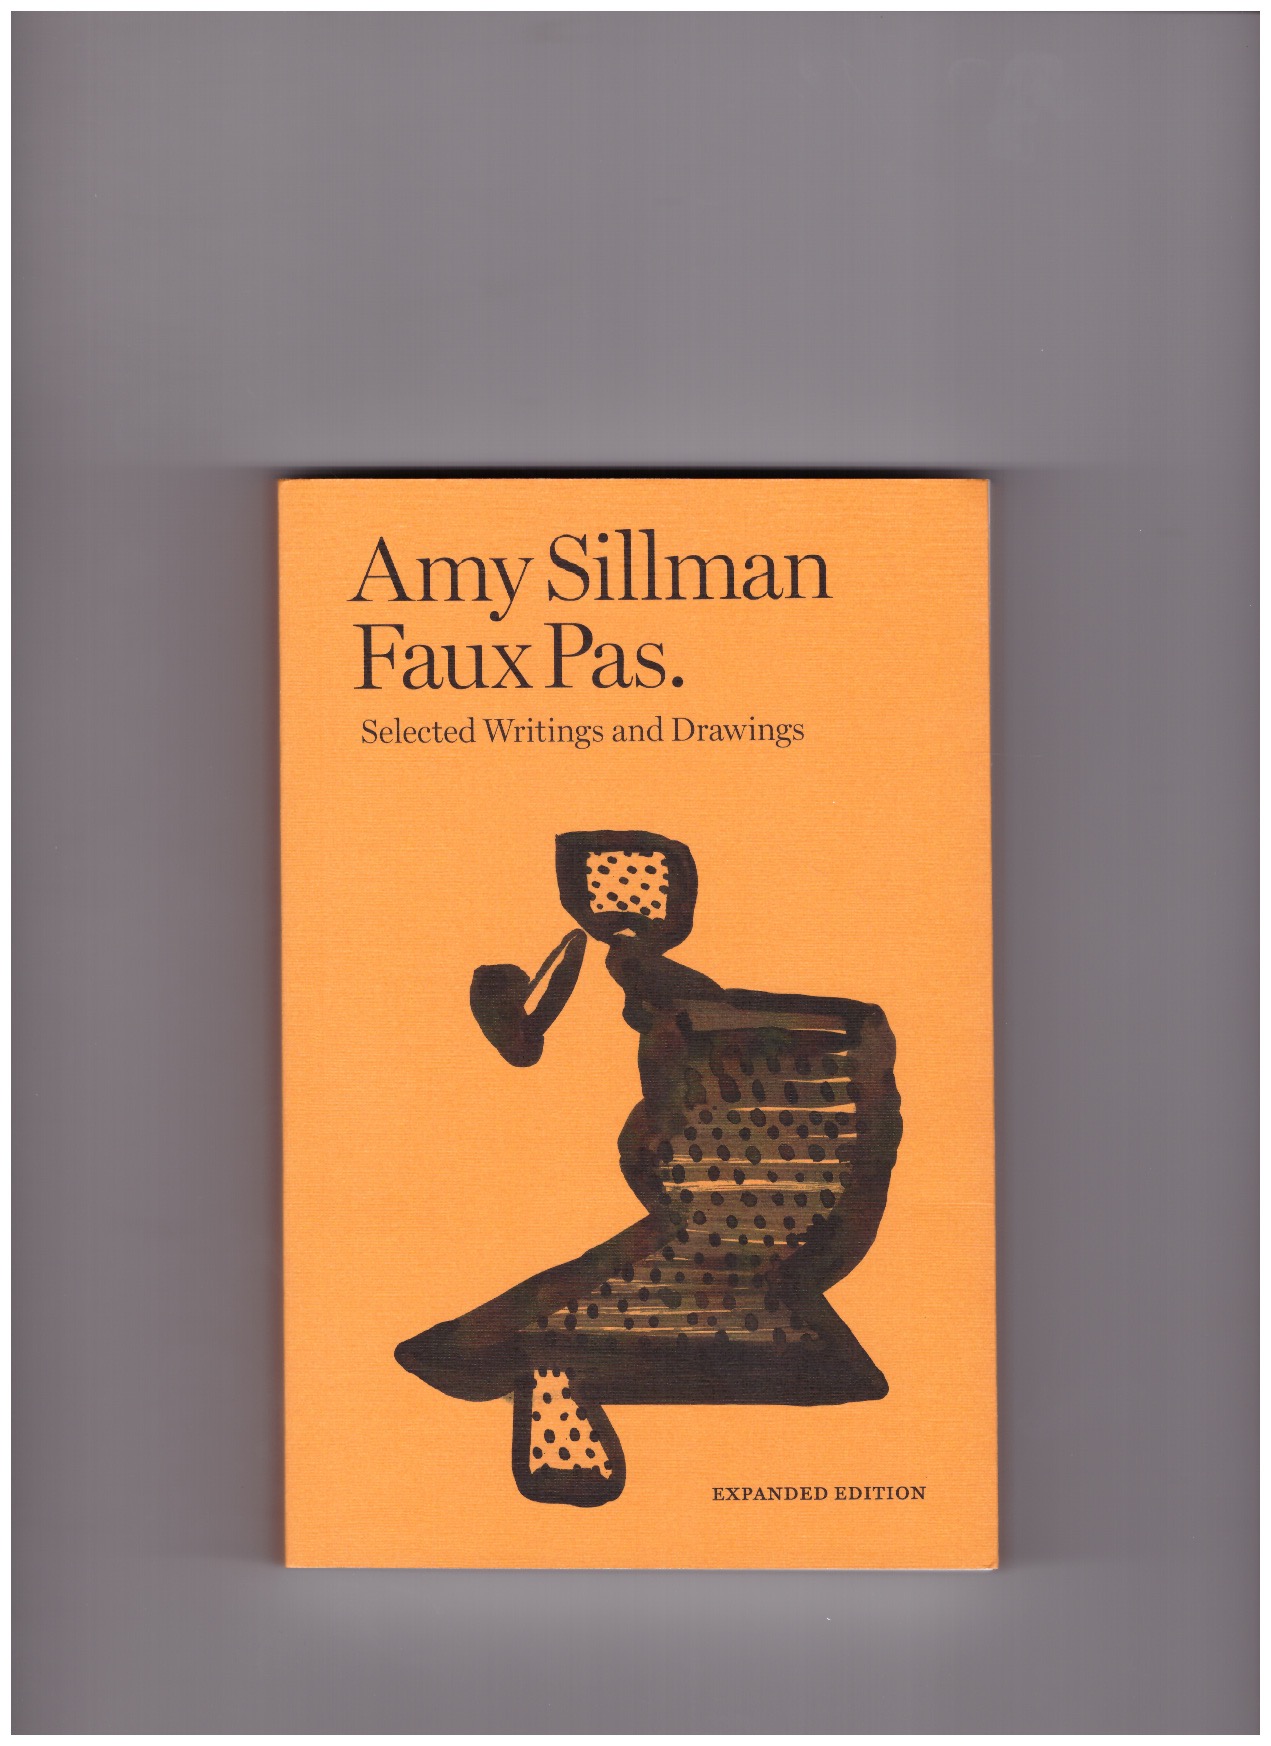 SILLMAN, Amy - Faux Pas. Selected Writings and Drawings (Expanded Edition)